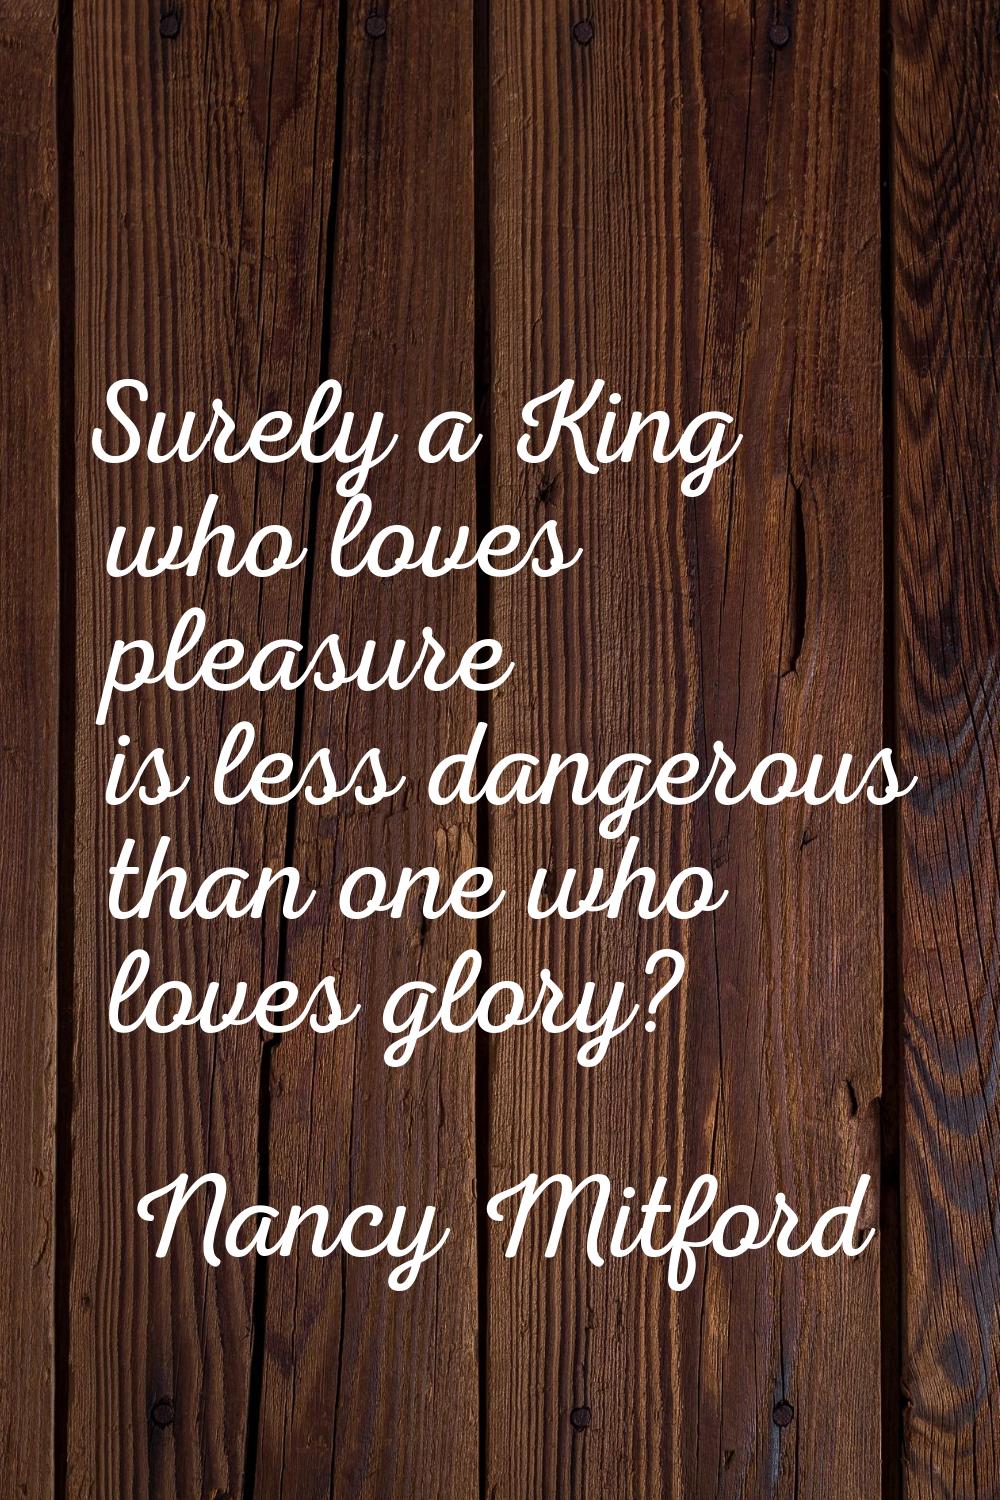 Surely a King who loves pleasure is less dangerous than one who loves glory?